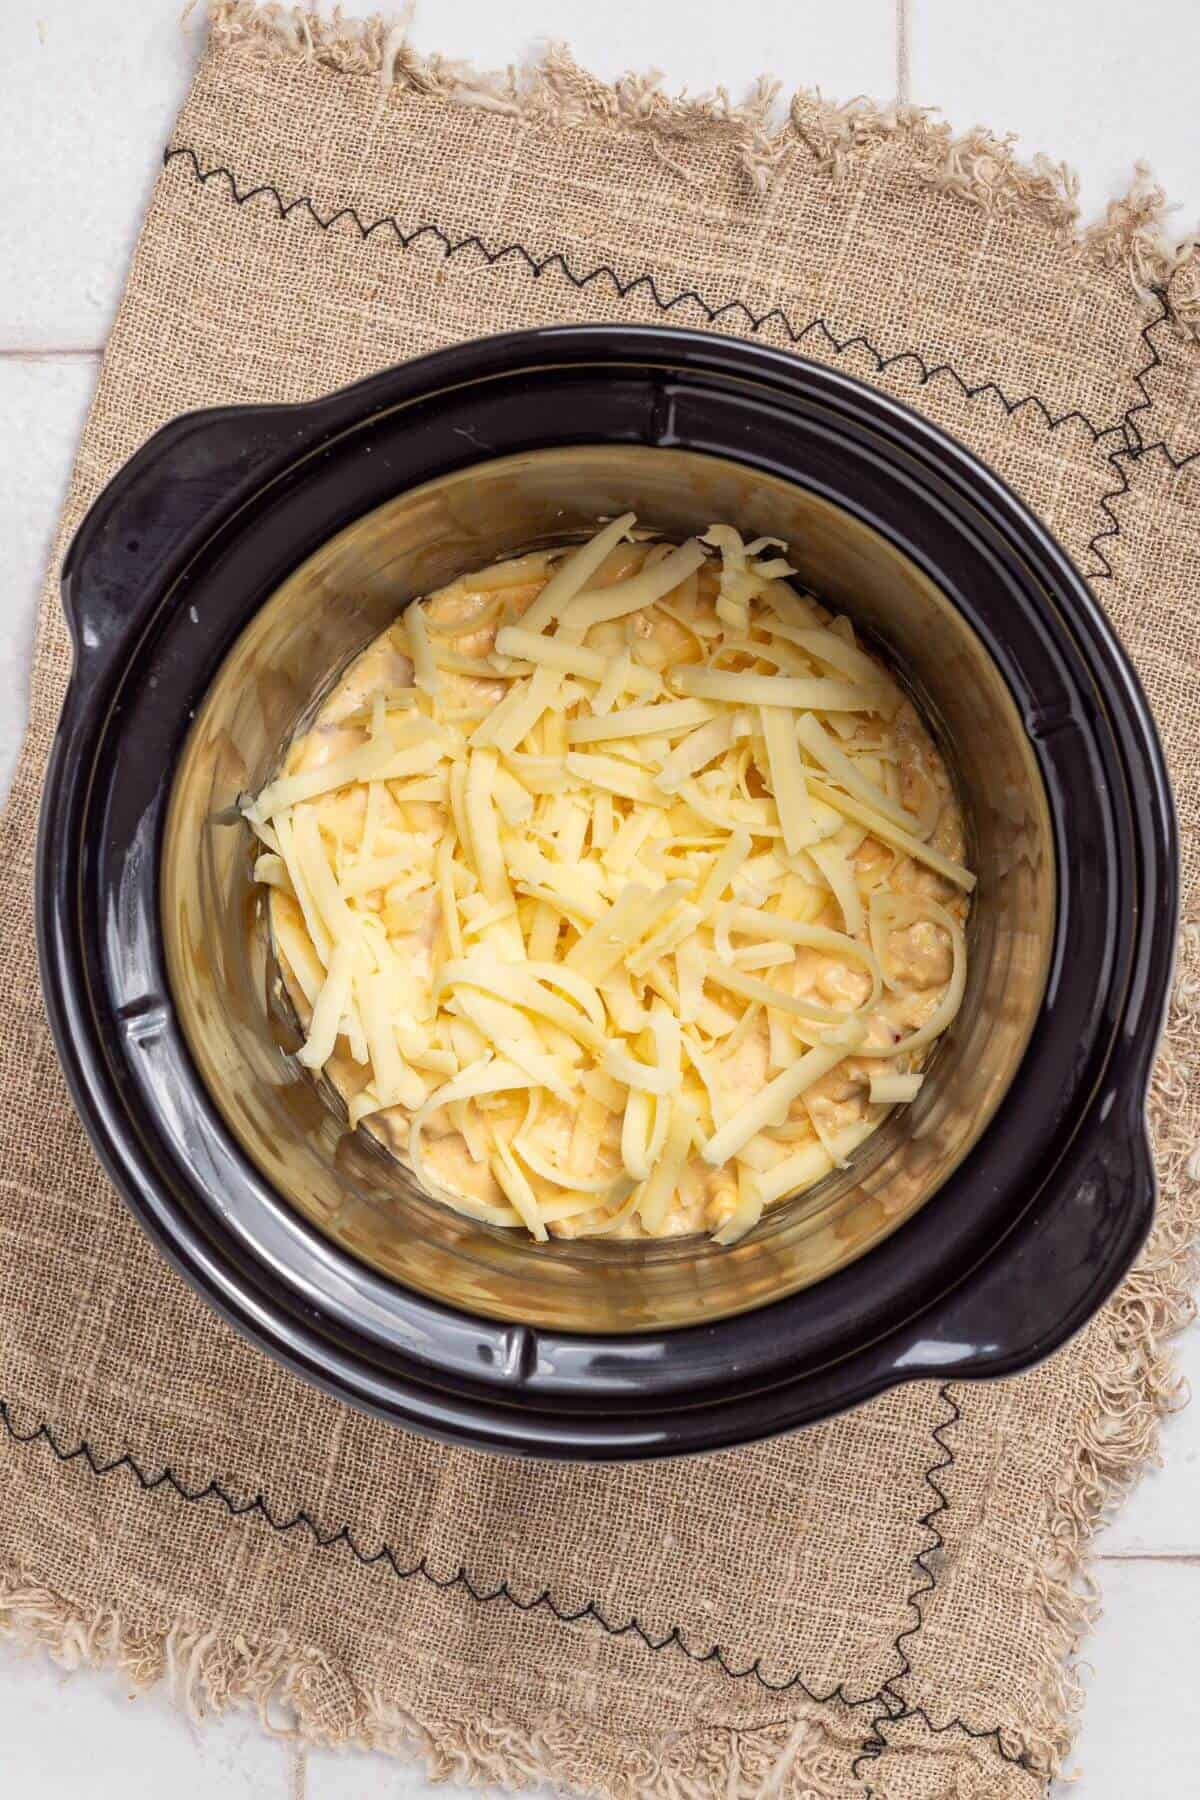 Shredded cheese added to slow cooker crock pot.